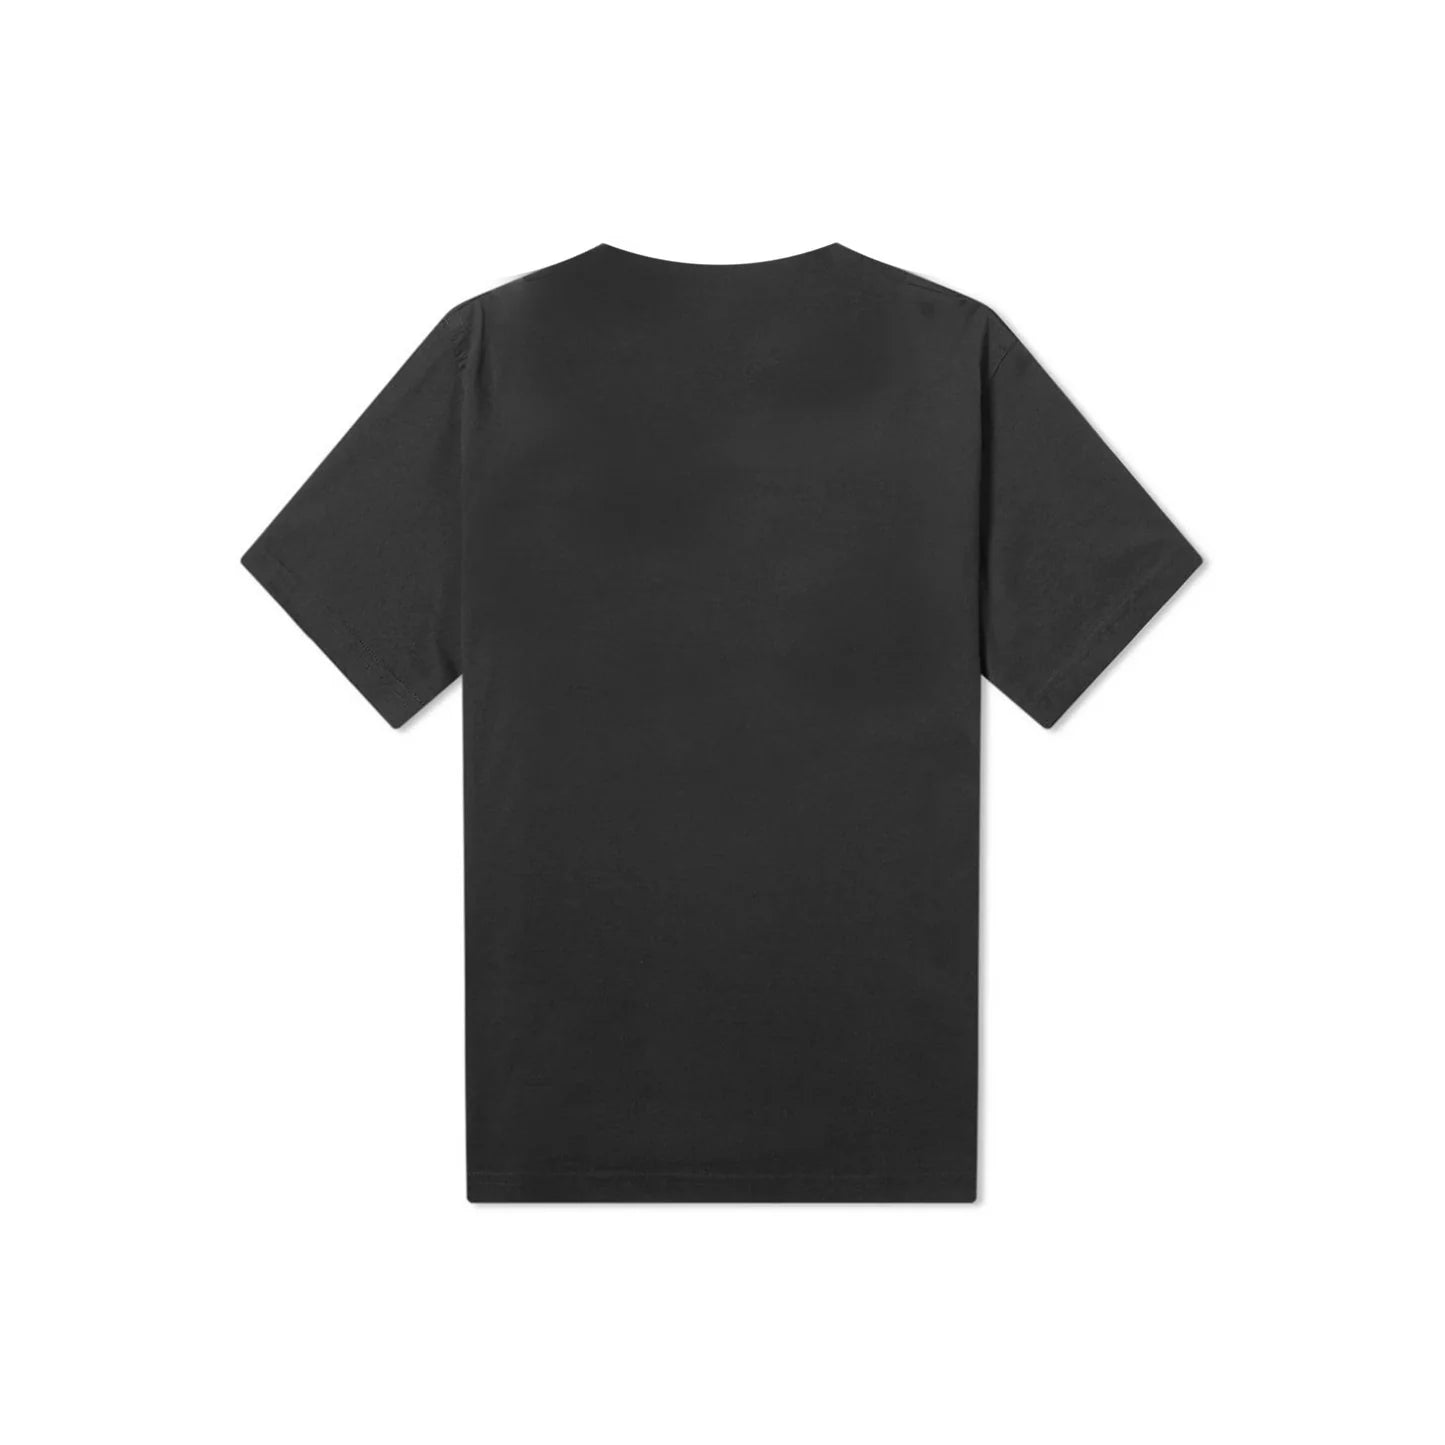 Givenchy Bull Tee Black (Oversize Fit)